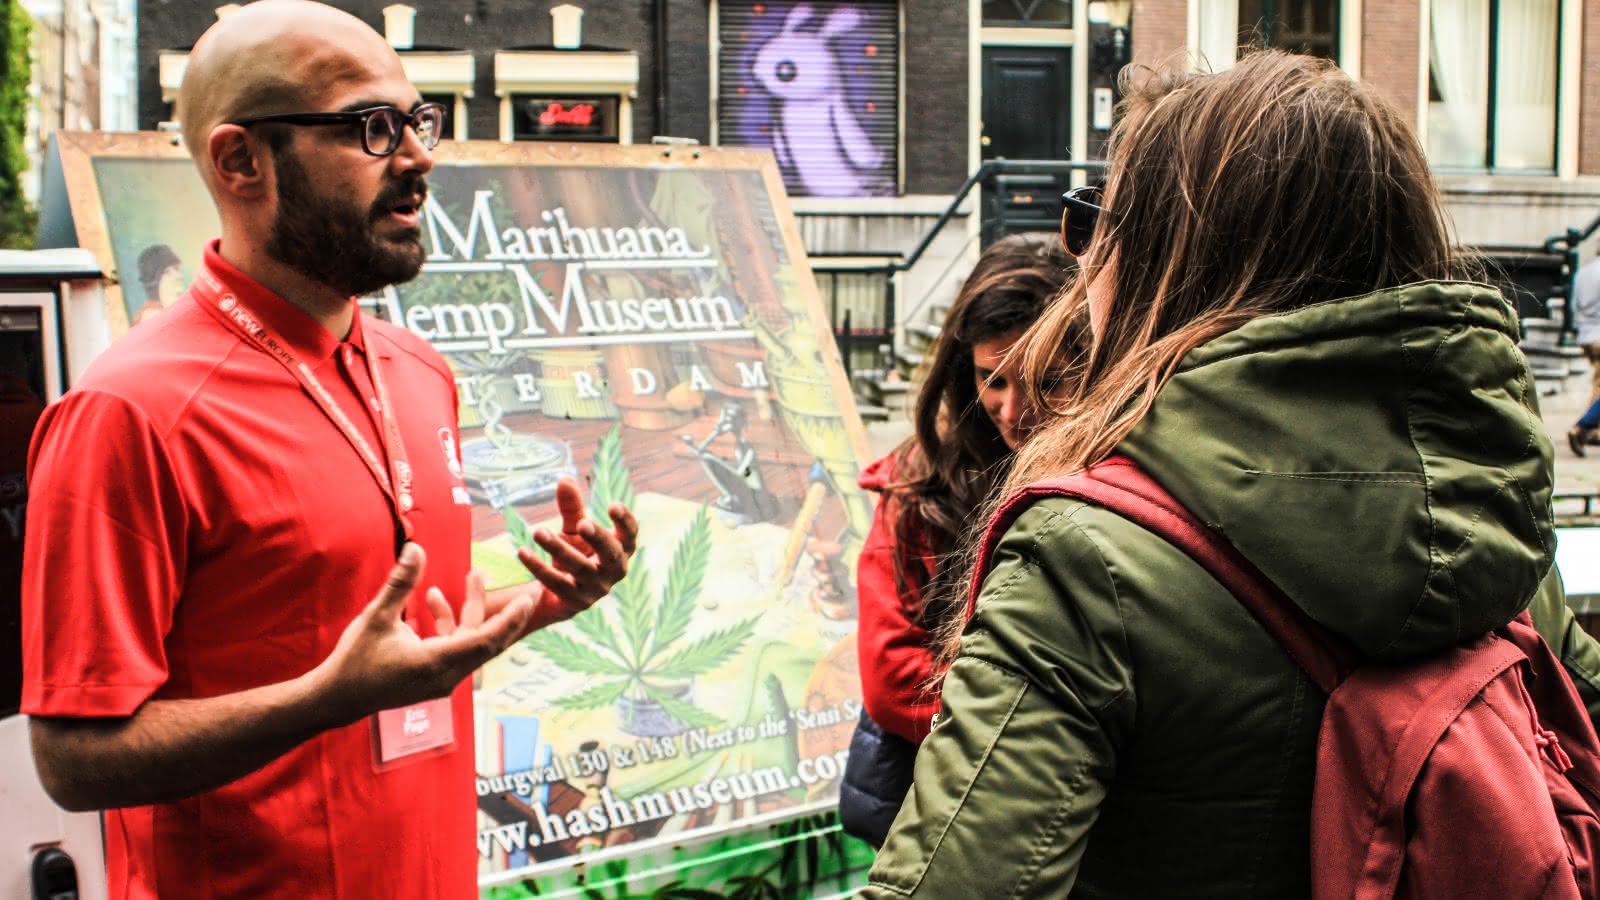 The Alternative Tour group in front of the Hash Marihuana & Hemp Museum in Amsterdam 